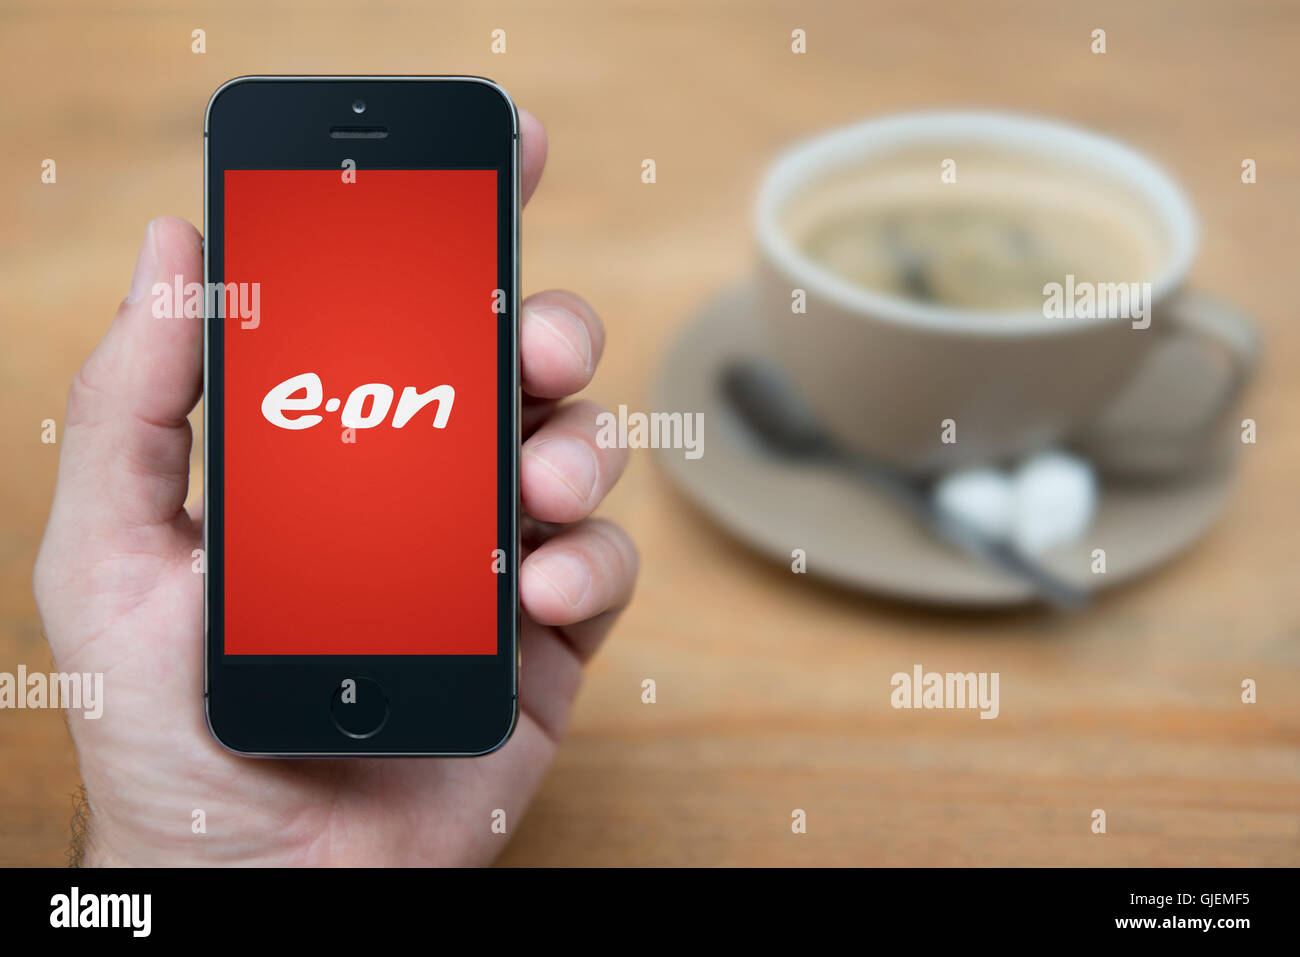 A man looks at his iPhone which displays the E.On logo, while sat with a cup of coffee (Editorial use only). Stock Photo